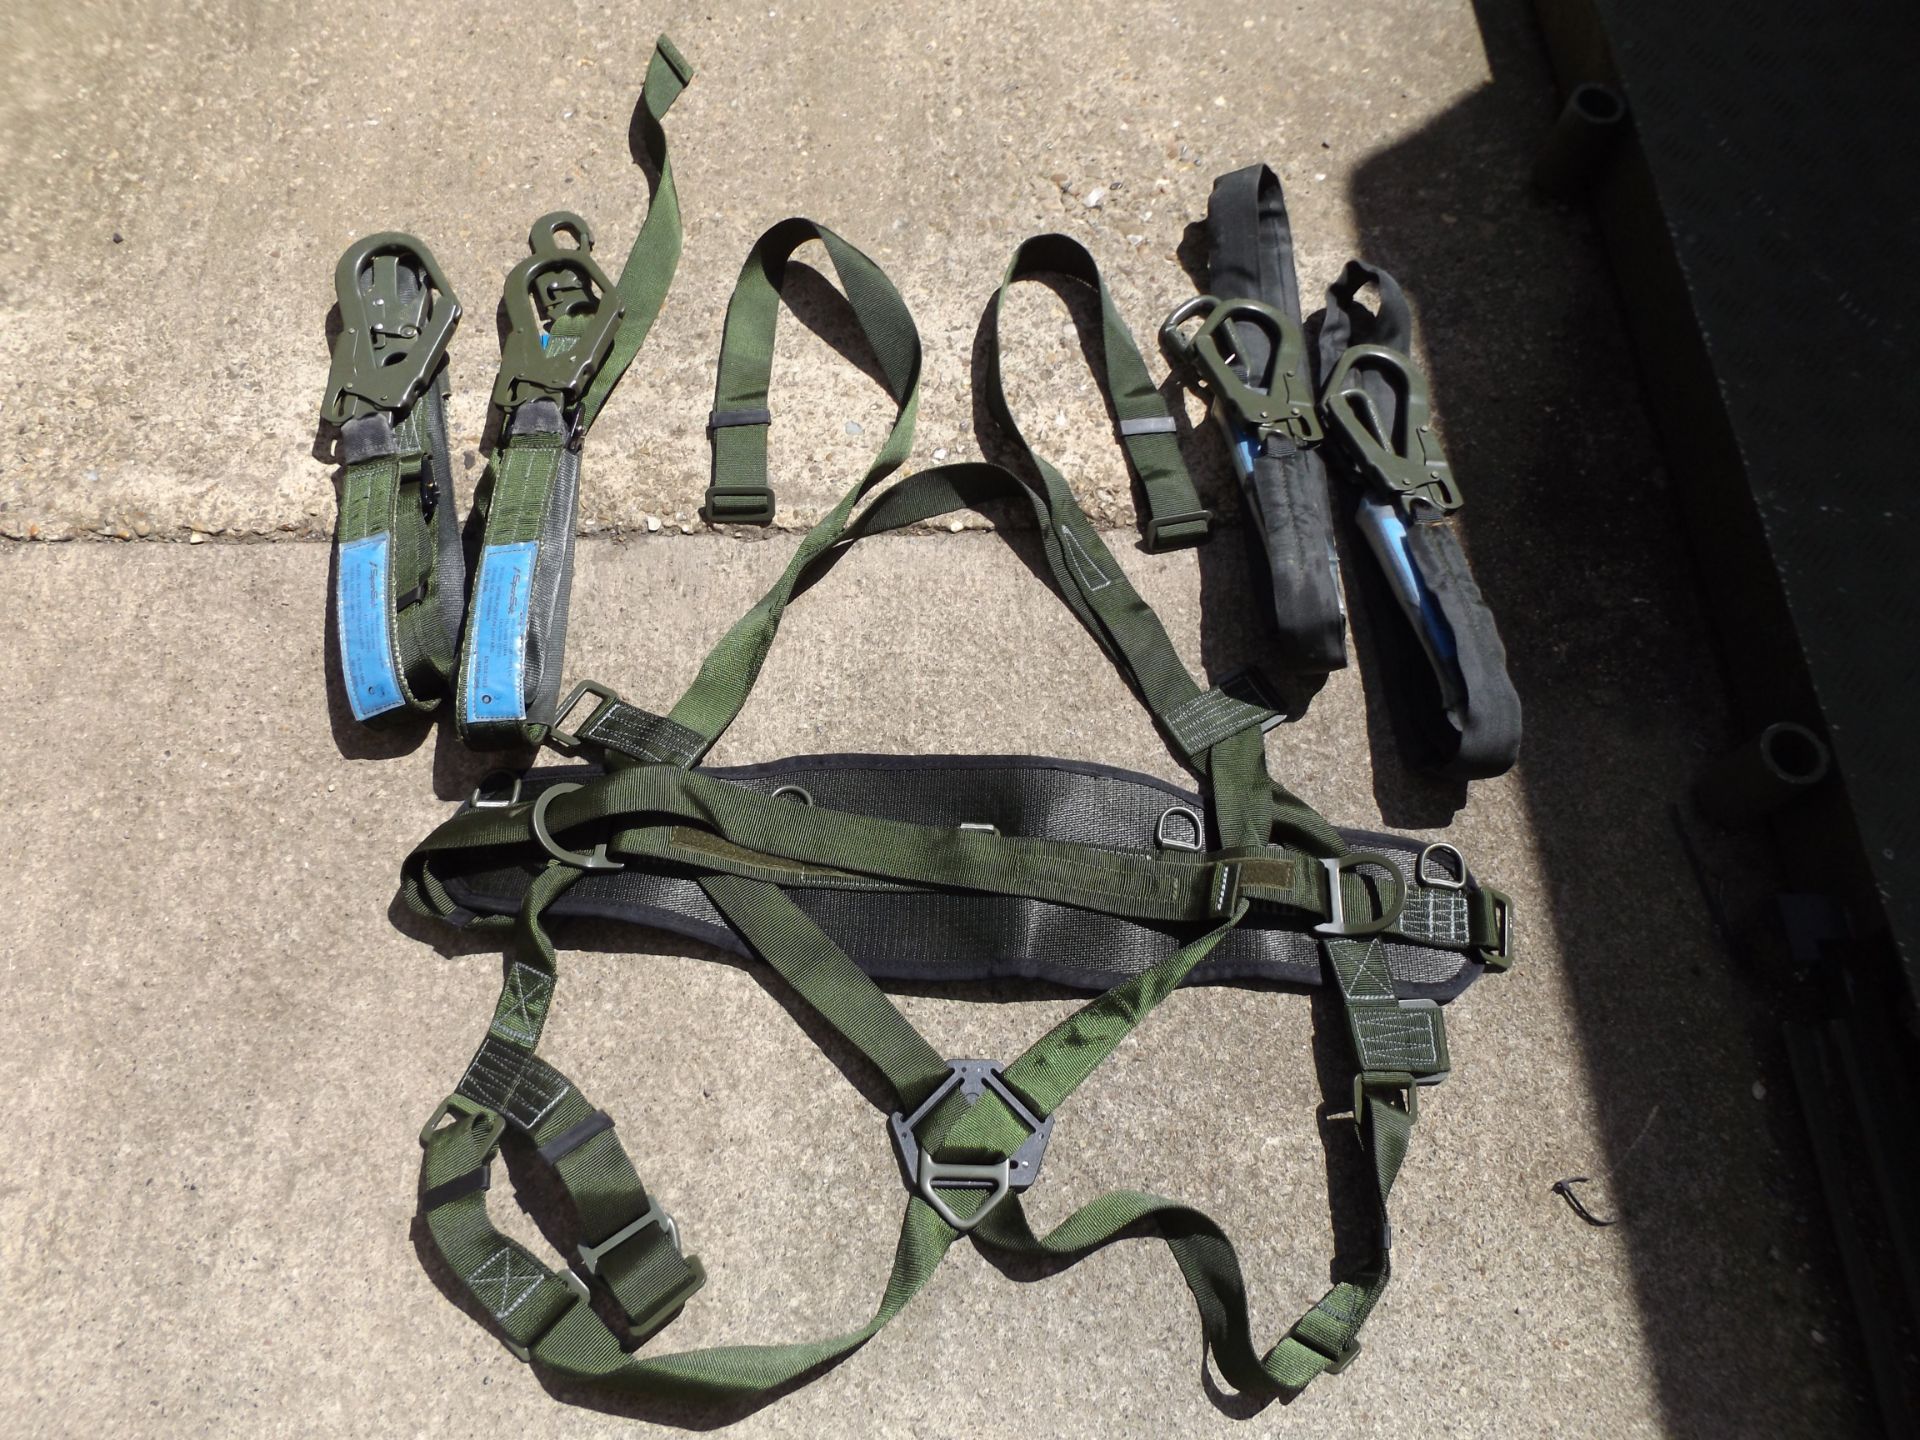 Spanset Full Body Harness with Work Position Lanyards